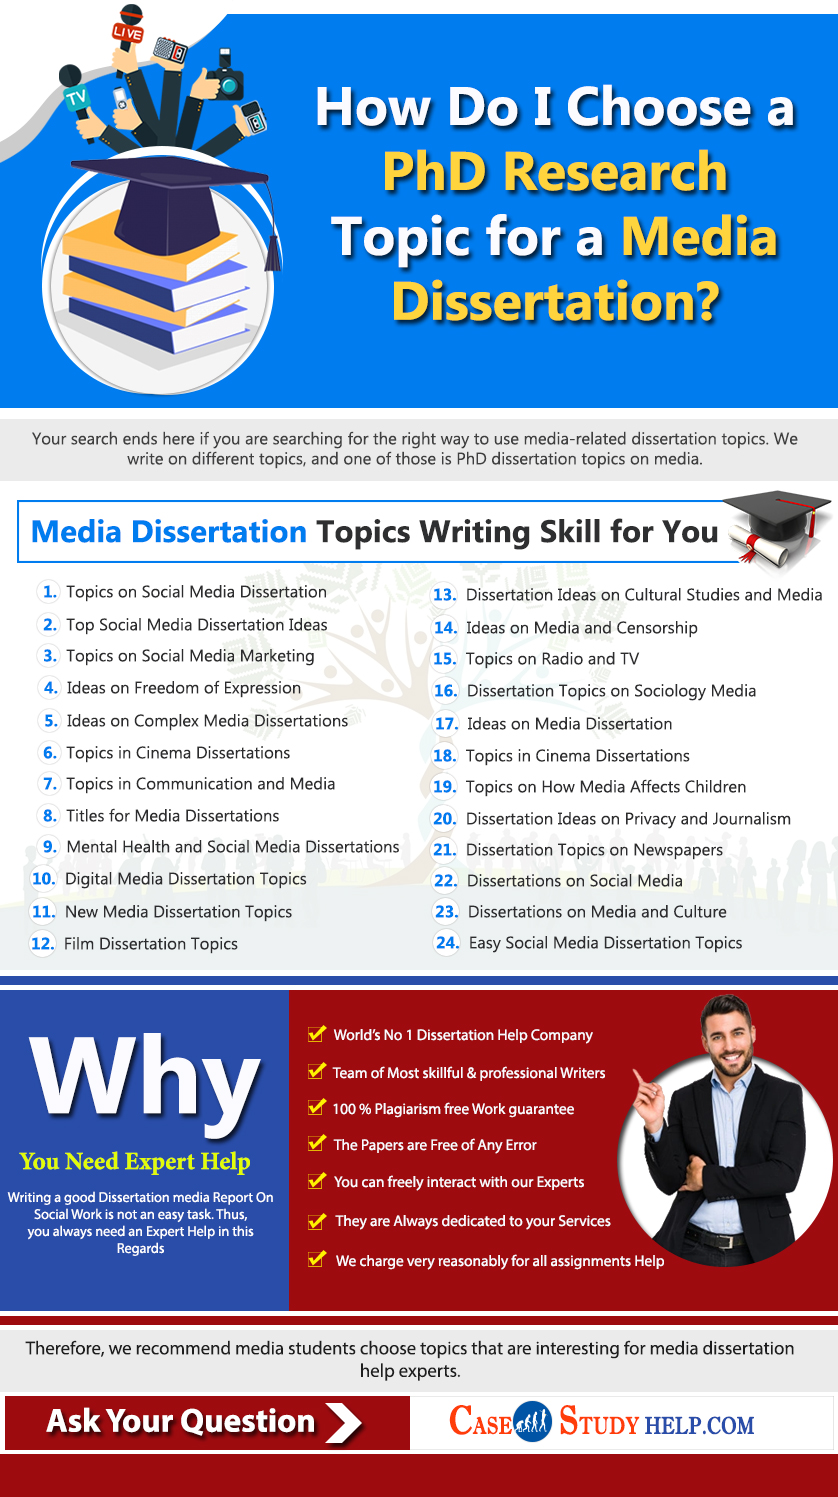 How Do I Choose a PhD Research Topic for a Media Dissertation